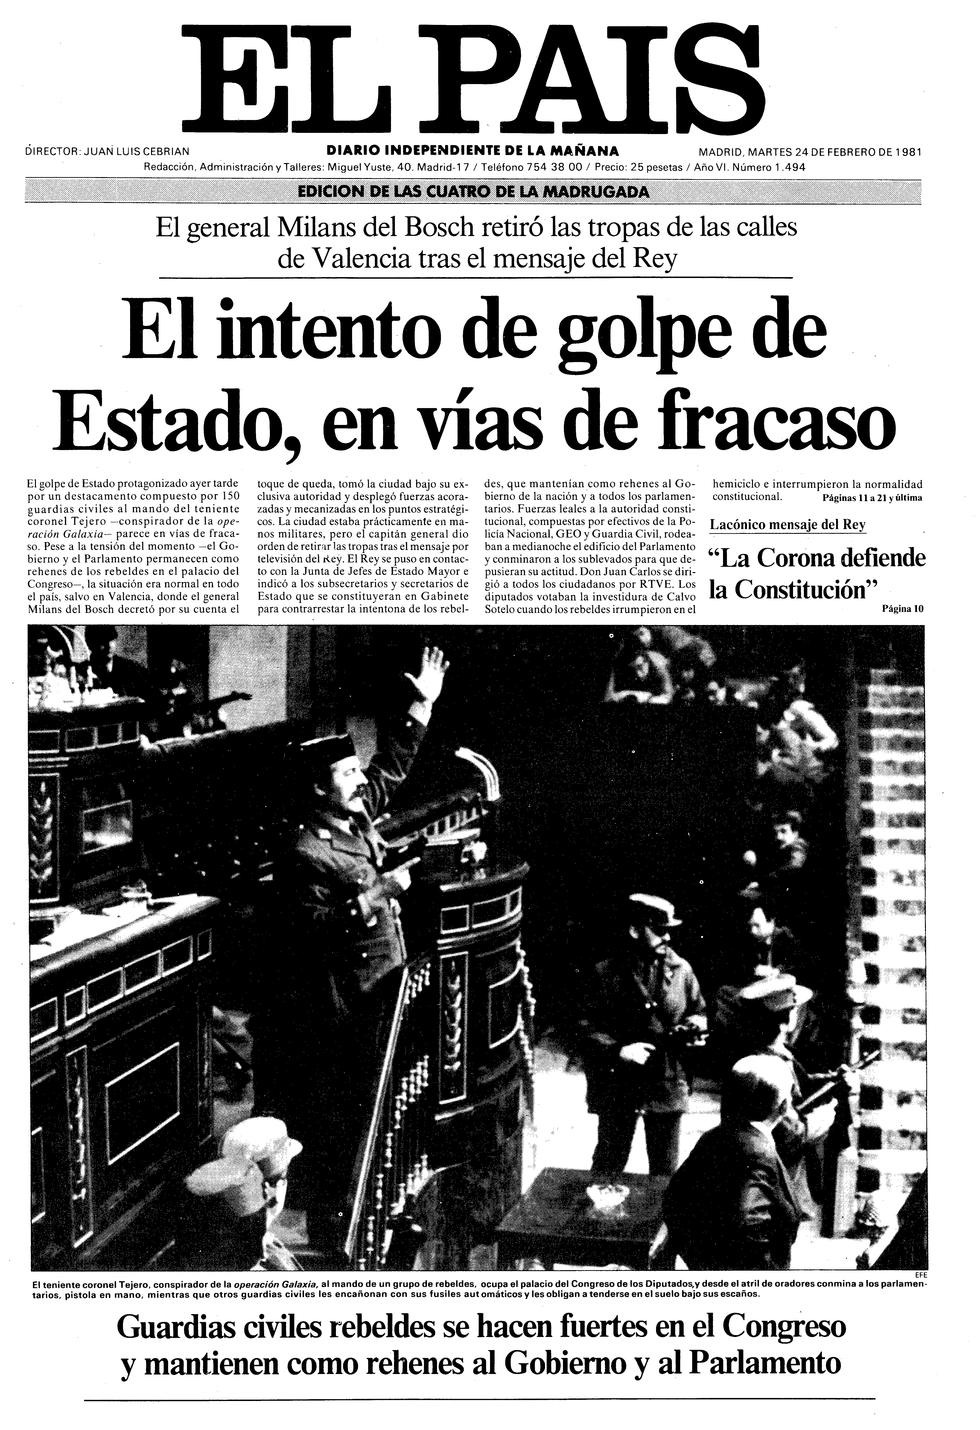 El Pais front page 24th february 1981